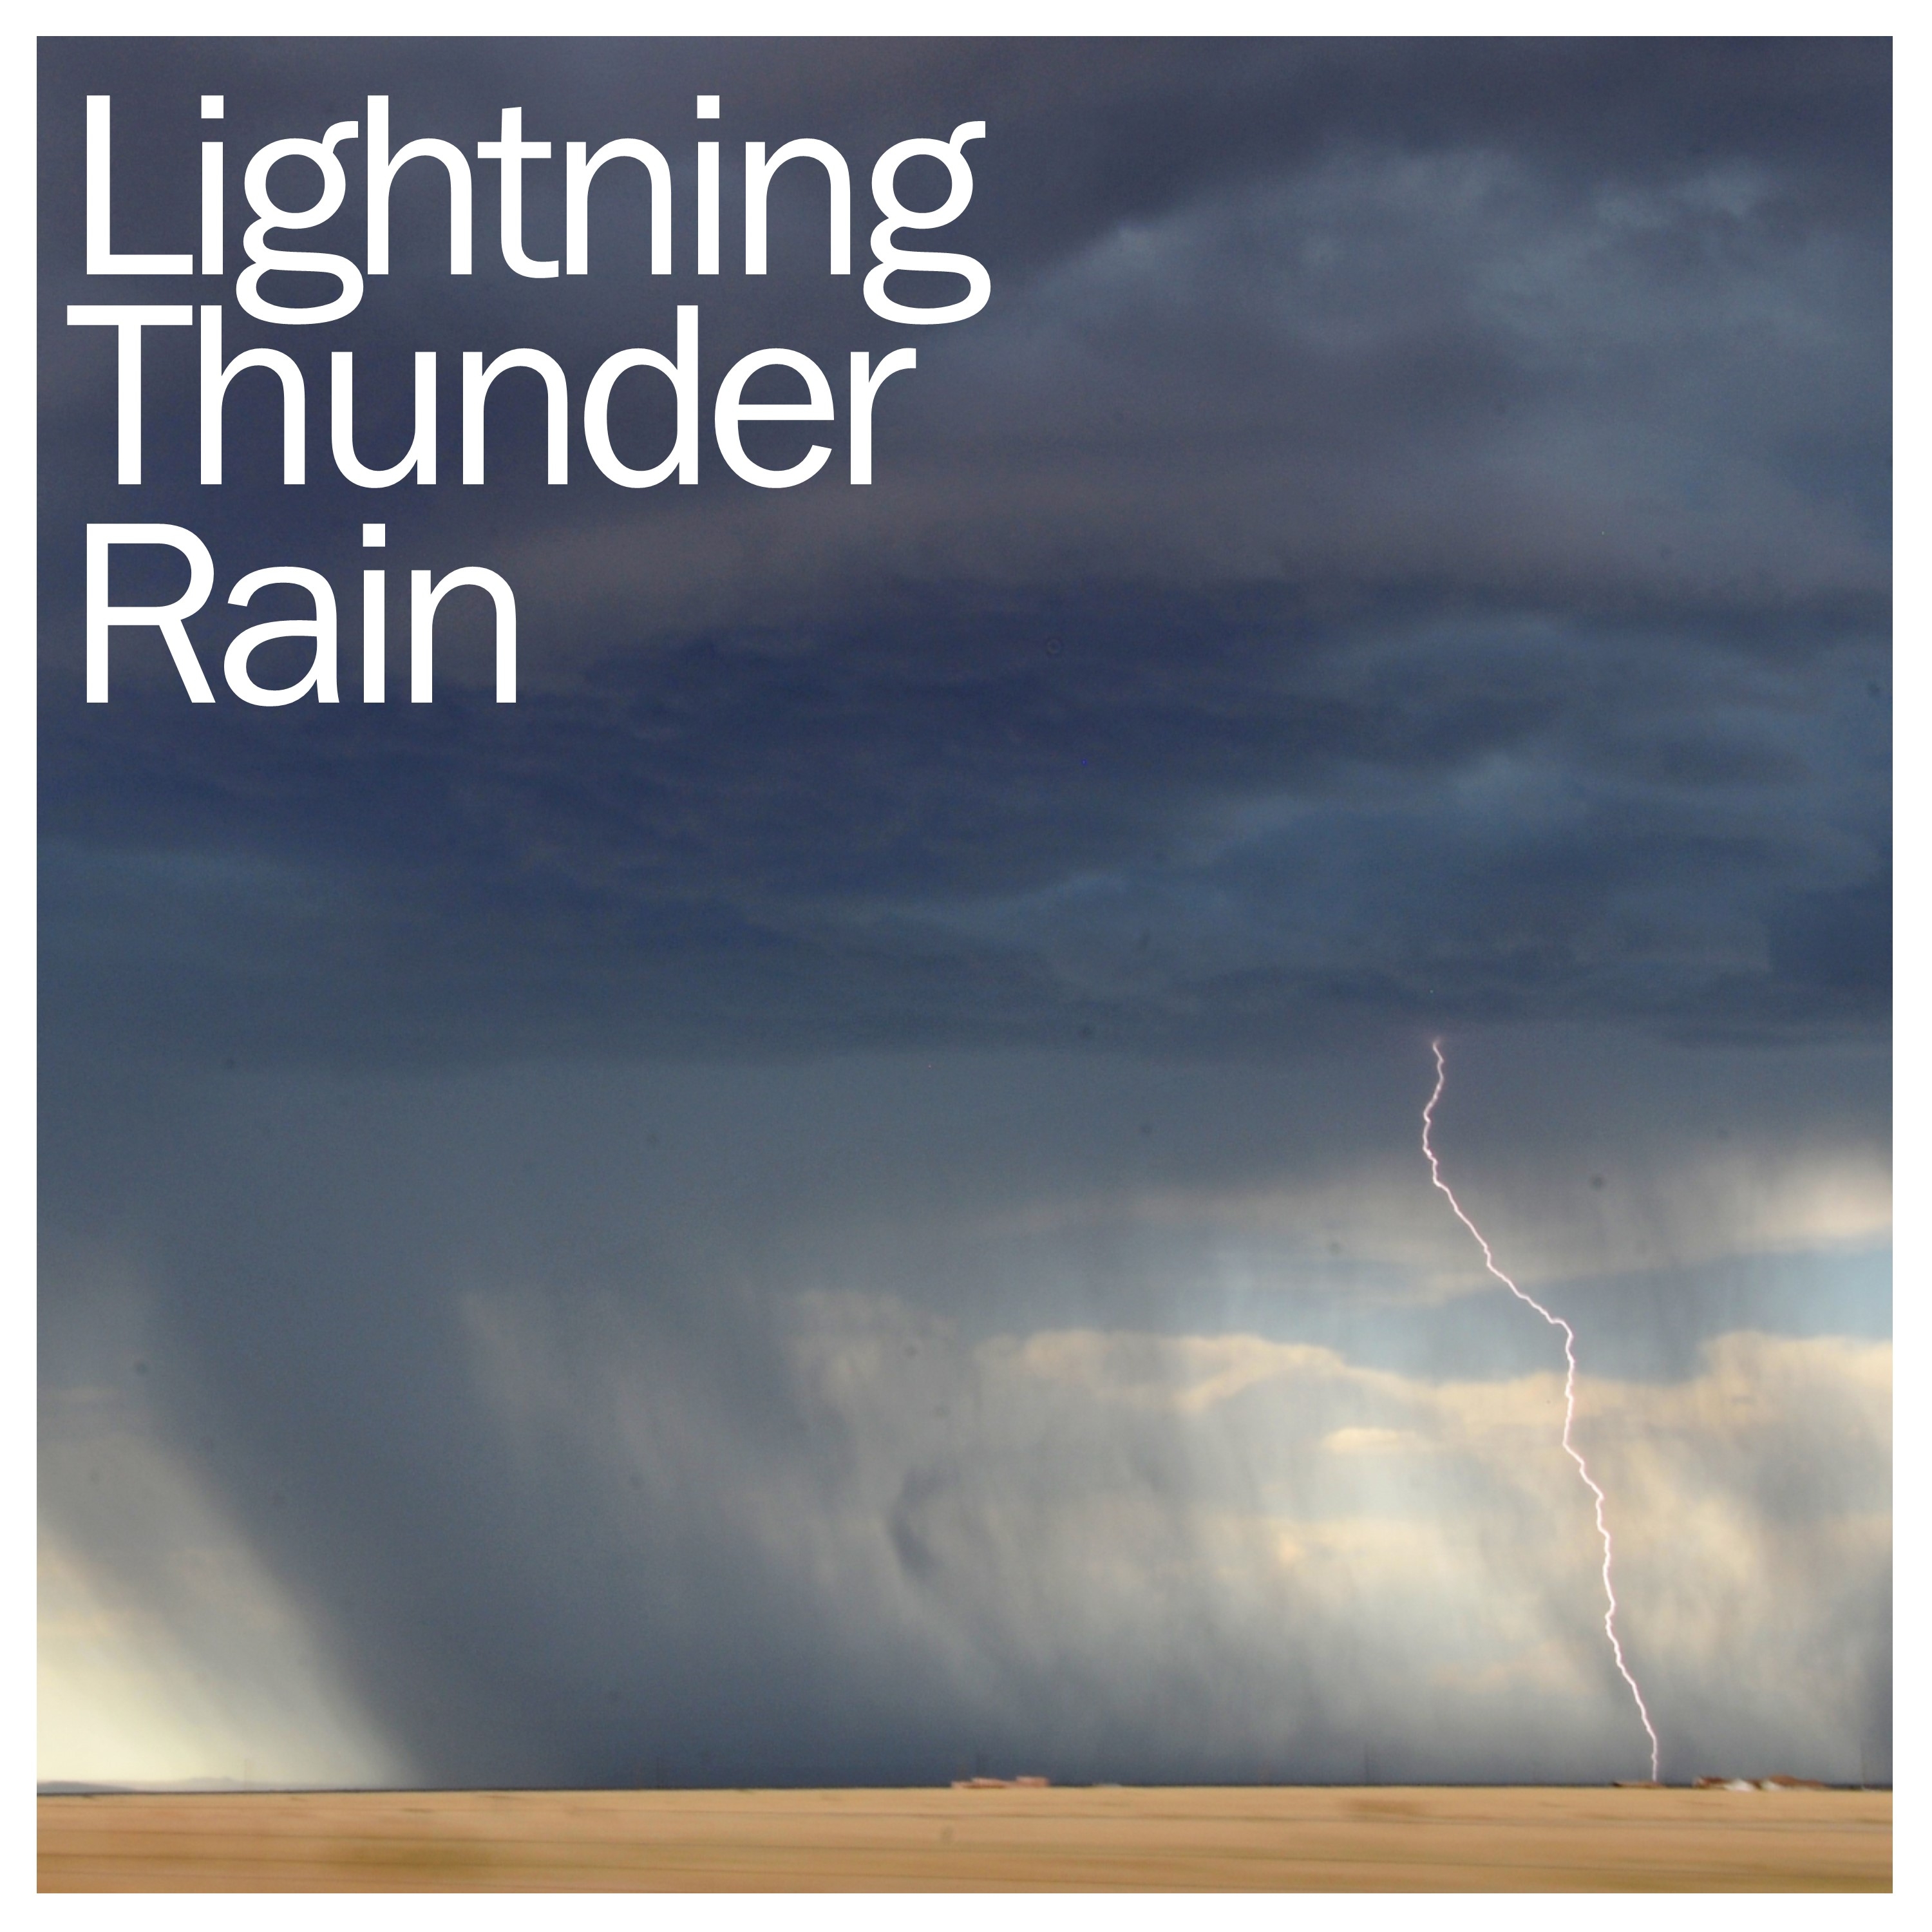 16 Sounds of Nature - Lightning, Thunder and Rain Storms